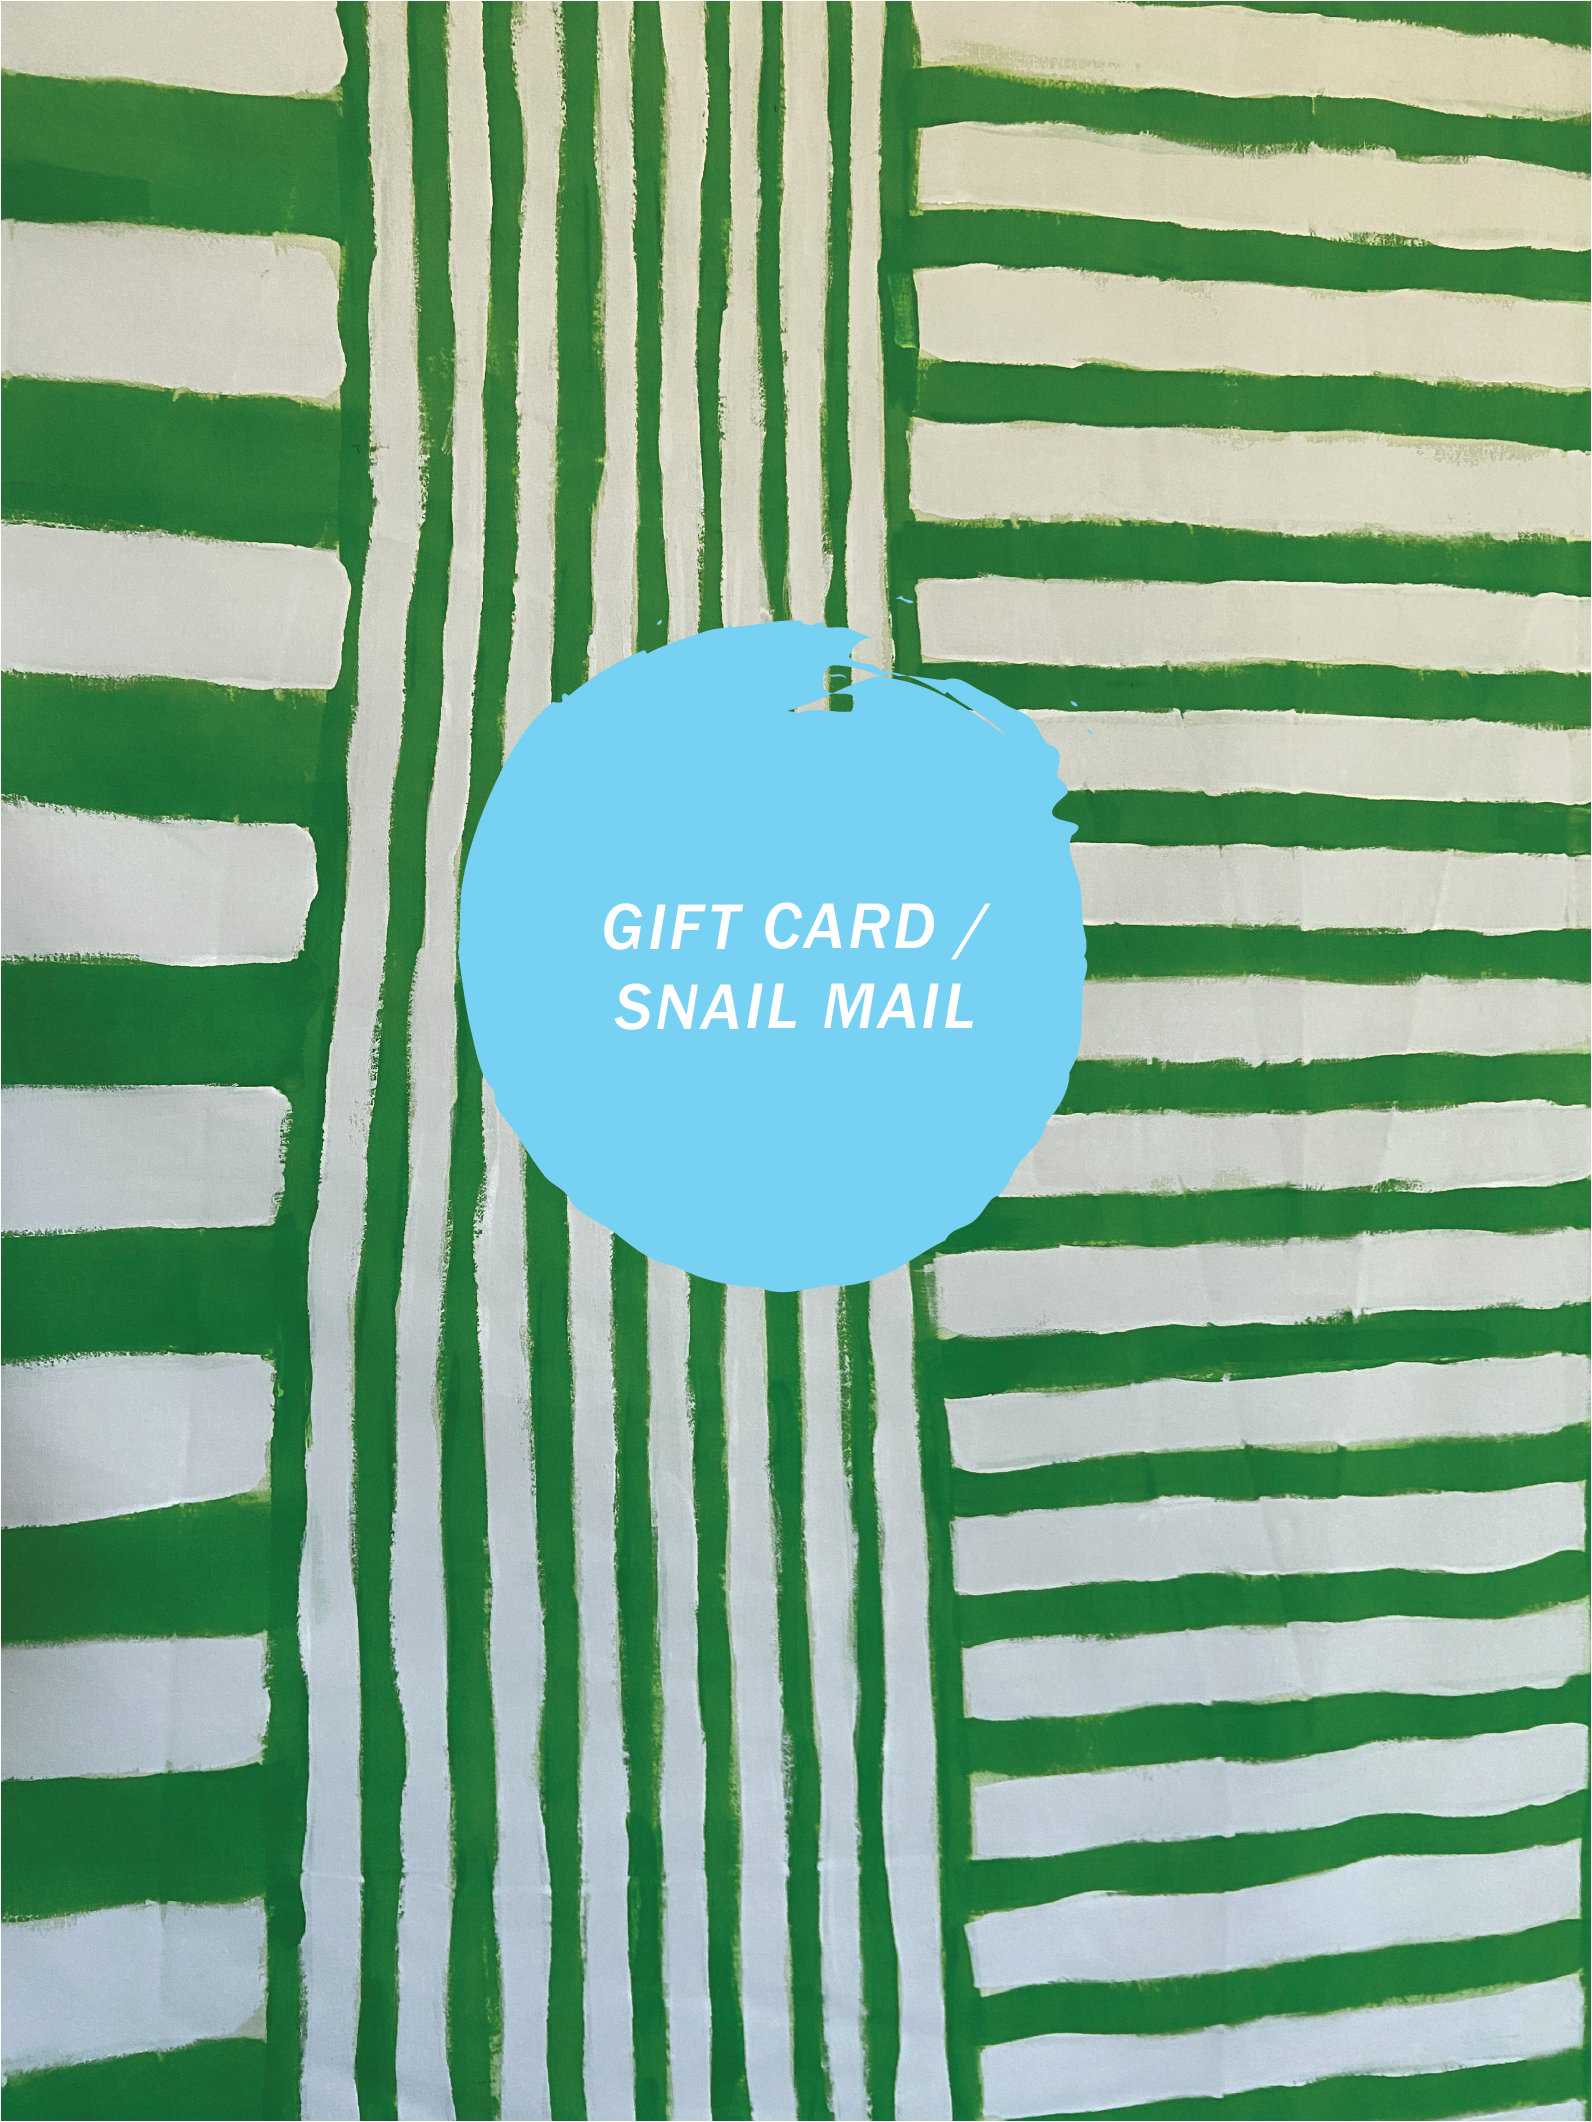 GIFT CARD / SNAIL MAIL